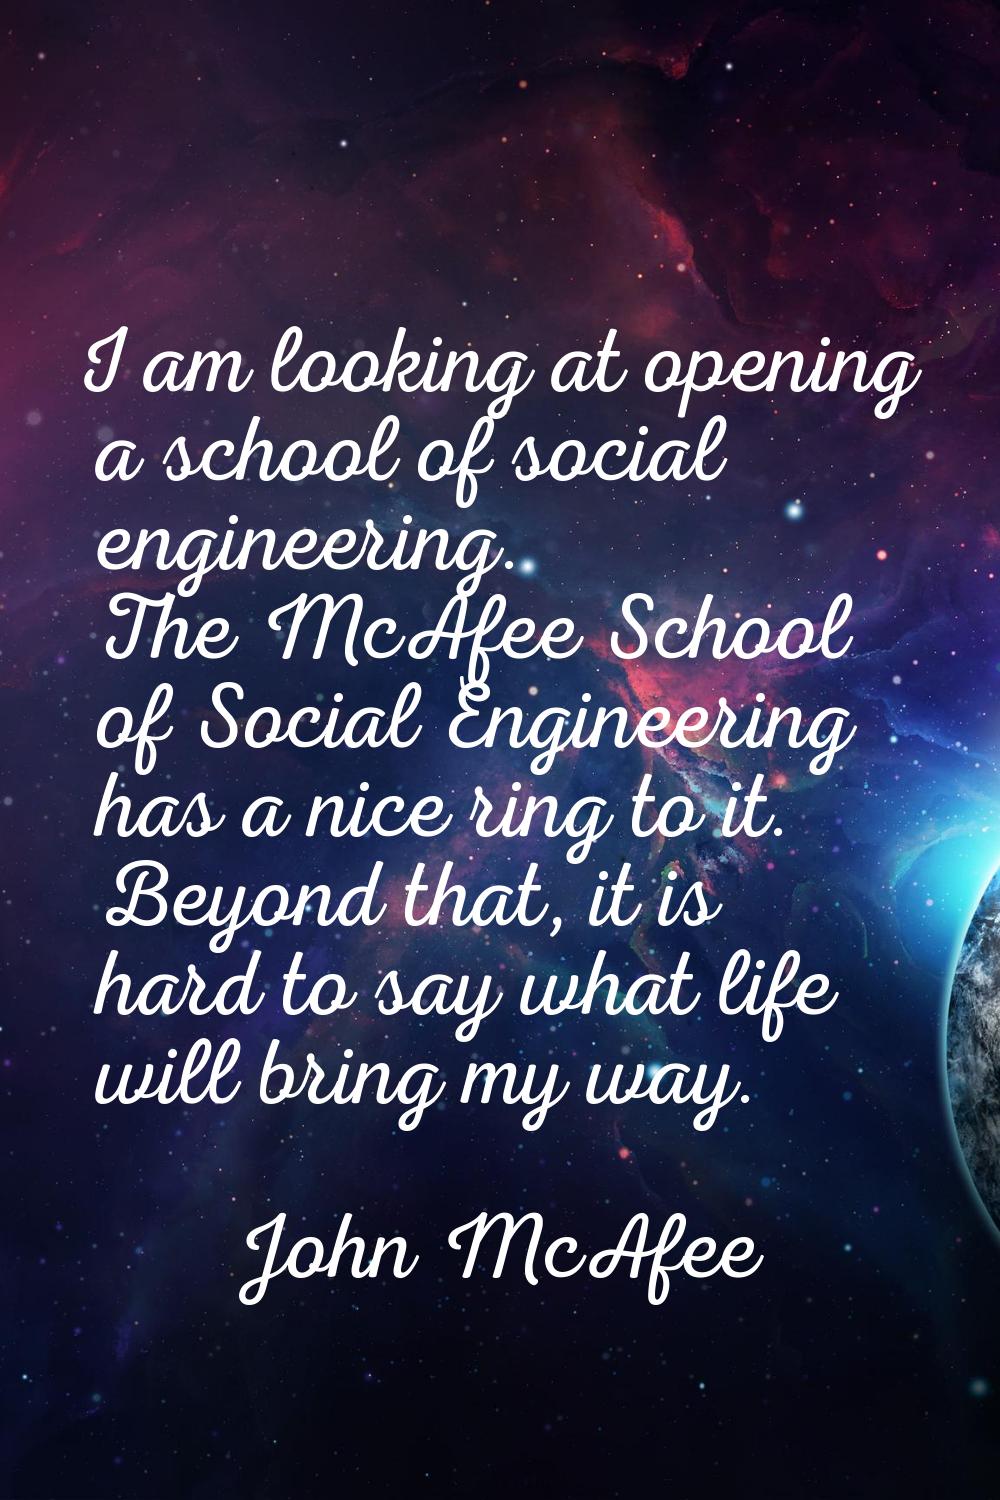 I am looking at opening a school of social engineering. The McAfee School of Social Engineering has